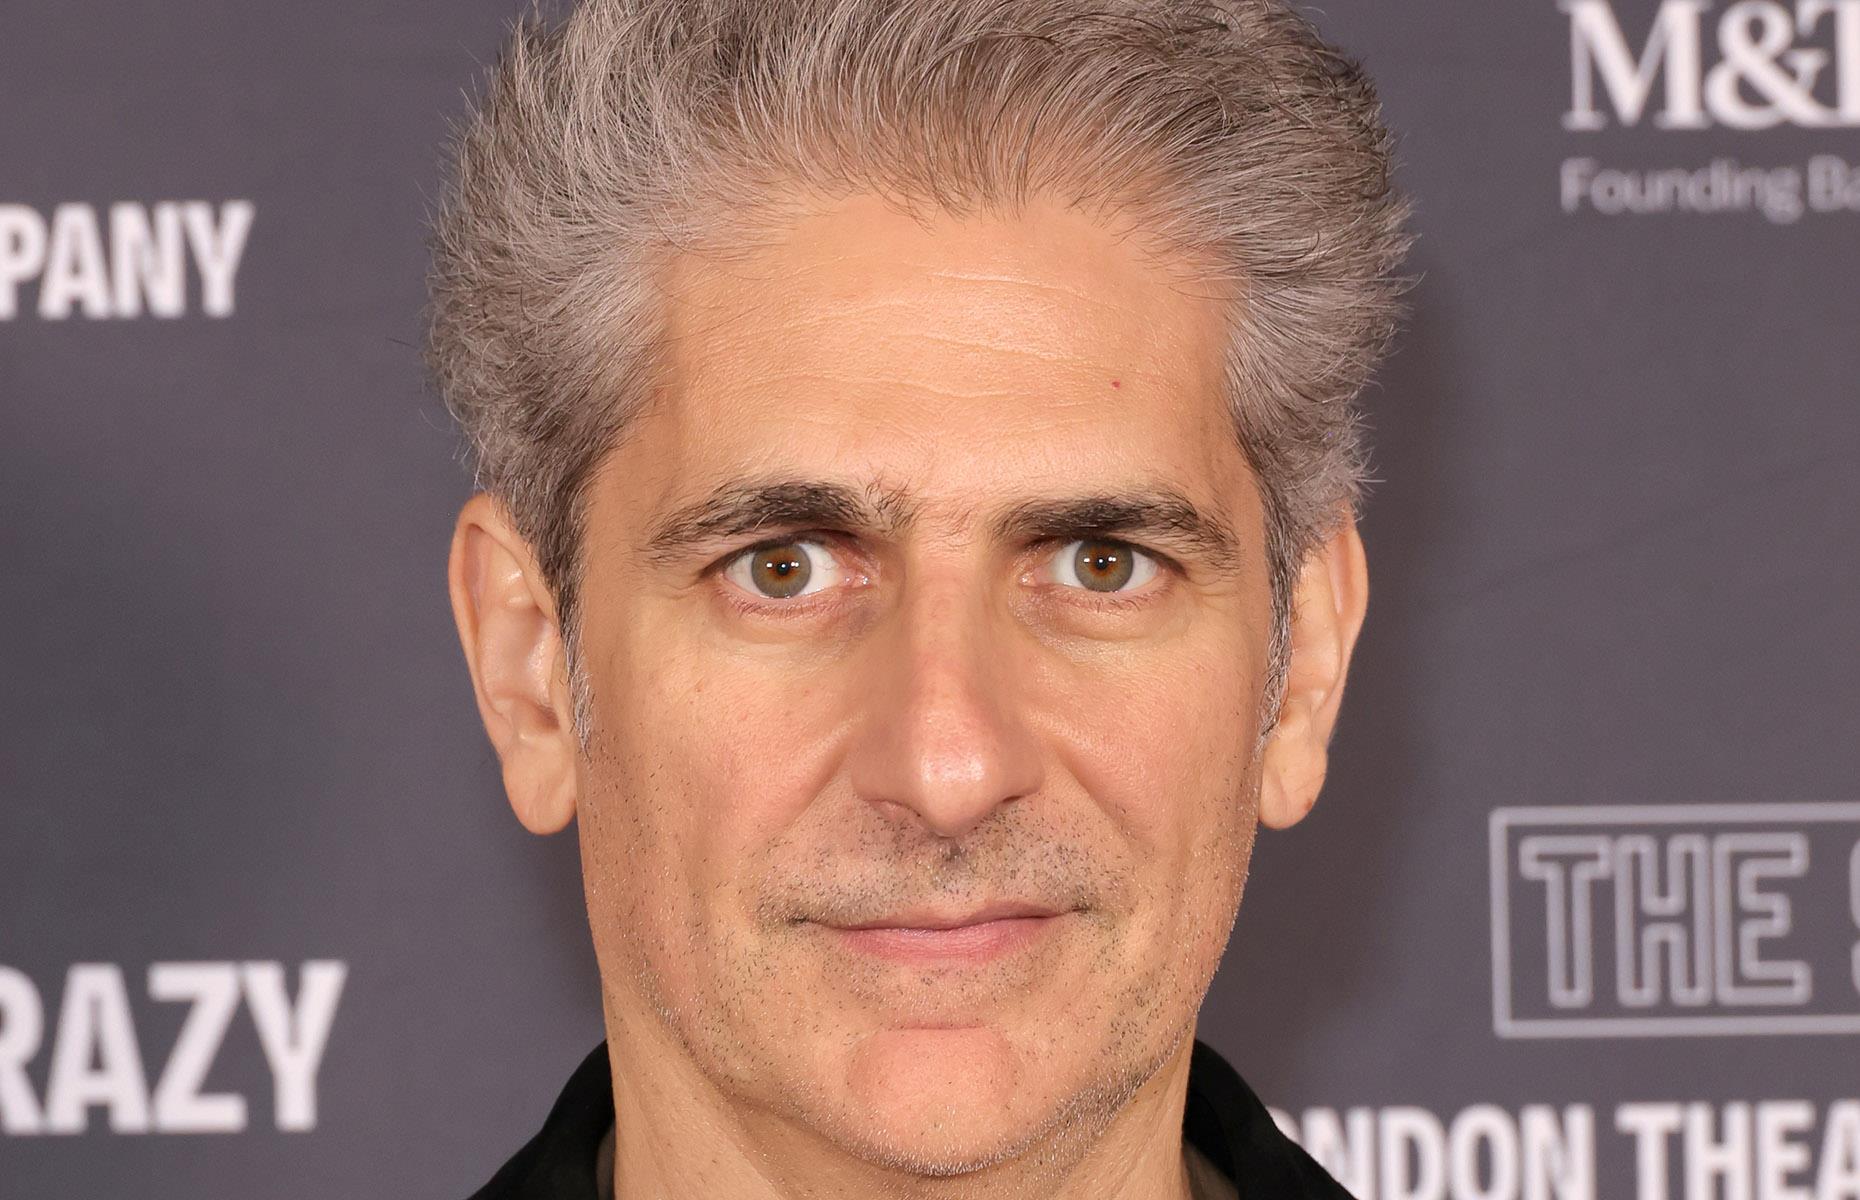 <p>Imperioli has racked up an impressive list of credits since <em>The Sopranos </em>wrapped, appearing in flicks such as the tearjerking 2009 drama <em>The Lovely Bones</em> and Spike Lee's <em>Oldboy</em> in 2013.</p>  <p>Meanwhile, his small screen roles include the sitcom <em>Girls</em>, the supernatural series<em> Lucifer</em> and, most recently, the critically acclaimed HBO dramedy <em>The White Lotus</em>.</p>  <p>The actor has also turned his hand to writing. As well as penning five episodes of <em>The Sopranos,</em> he wrote and directed the 2009 drama <em>The Hungry Ghosts</em>. Additionally, he hosted the long-running podcast <em>Talking Sopranos </em>with his co-star from the show, Steve Schirripa.</p>  <p>His estimated total fortune today is an impressive $20 million (£16m).</p>